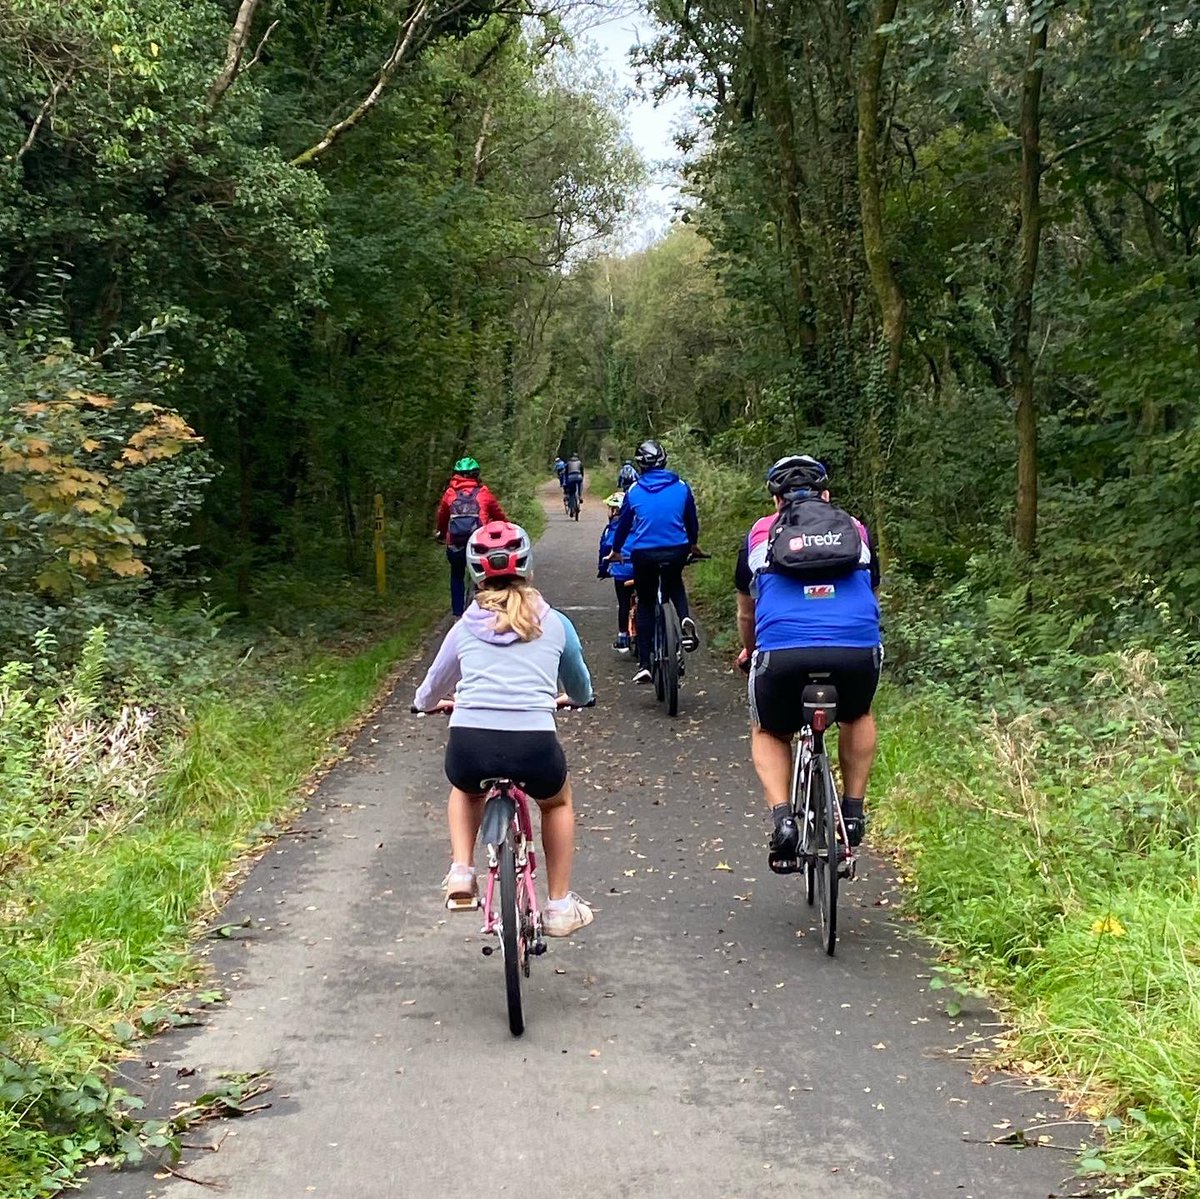 Cracking club family ride to #Pontarddulais this morning! Great group, lovely chats, gorgeous coffee and nice cakes too! And, we beat the rain!!!! Well done everyone, hope you all had fun!! #TeamGR🇳🇱 #cycling #fun #families #ride #clubride #coffee #cake @CoaltownCoffee